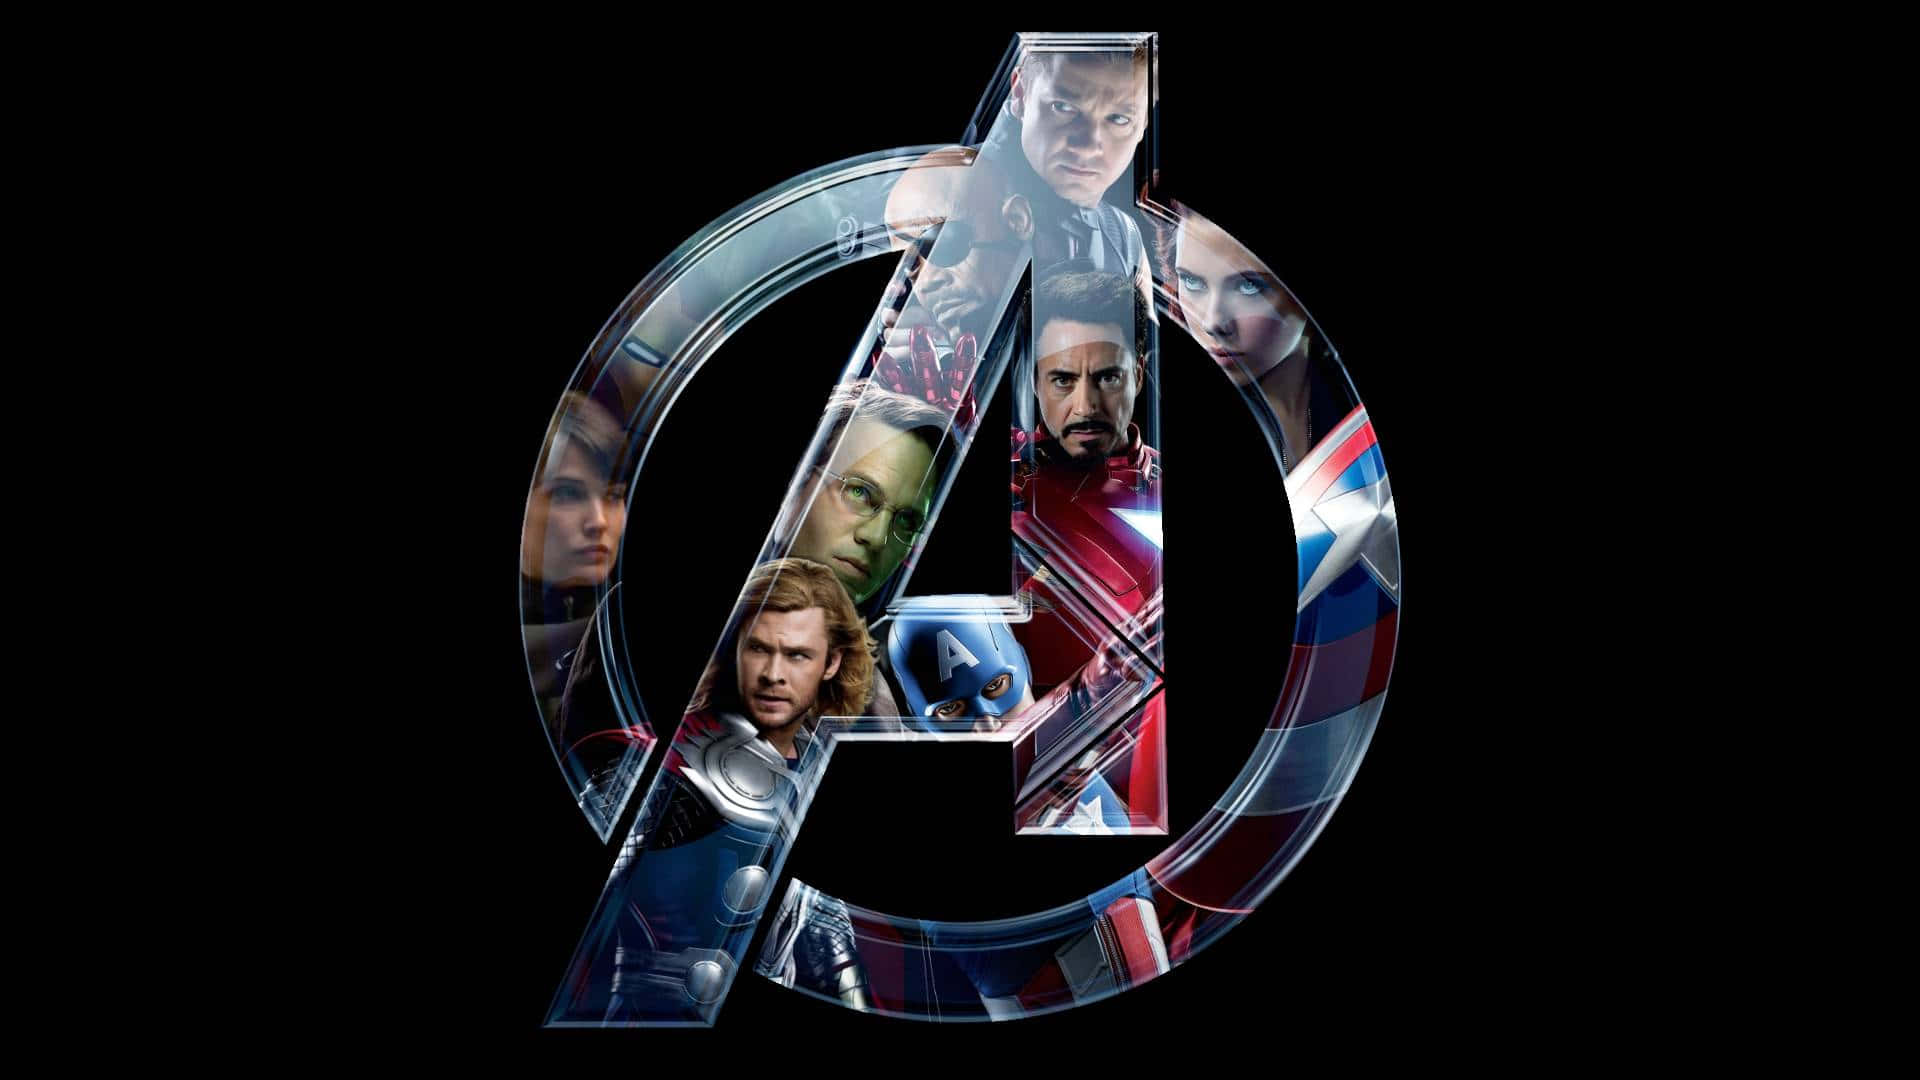 "Ready To Bring Marvel To Life?" Wallpaper